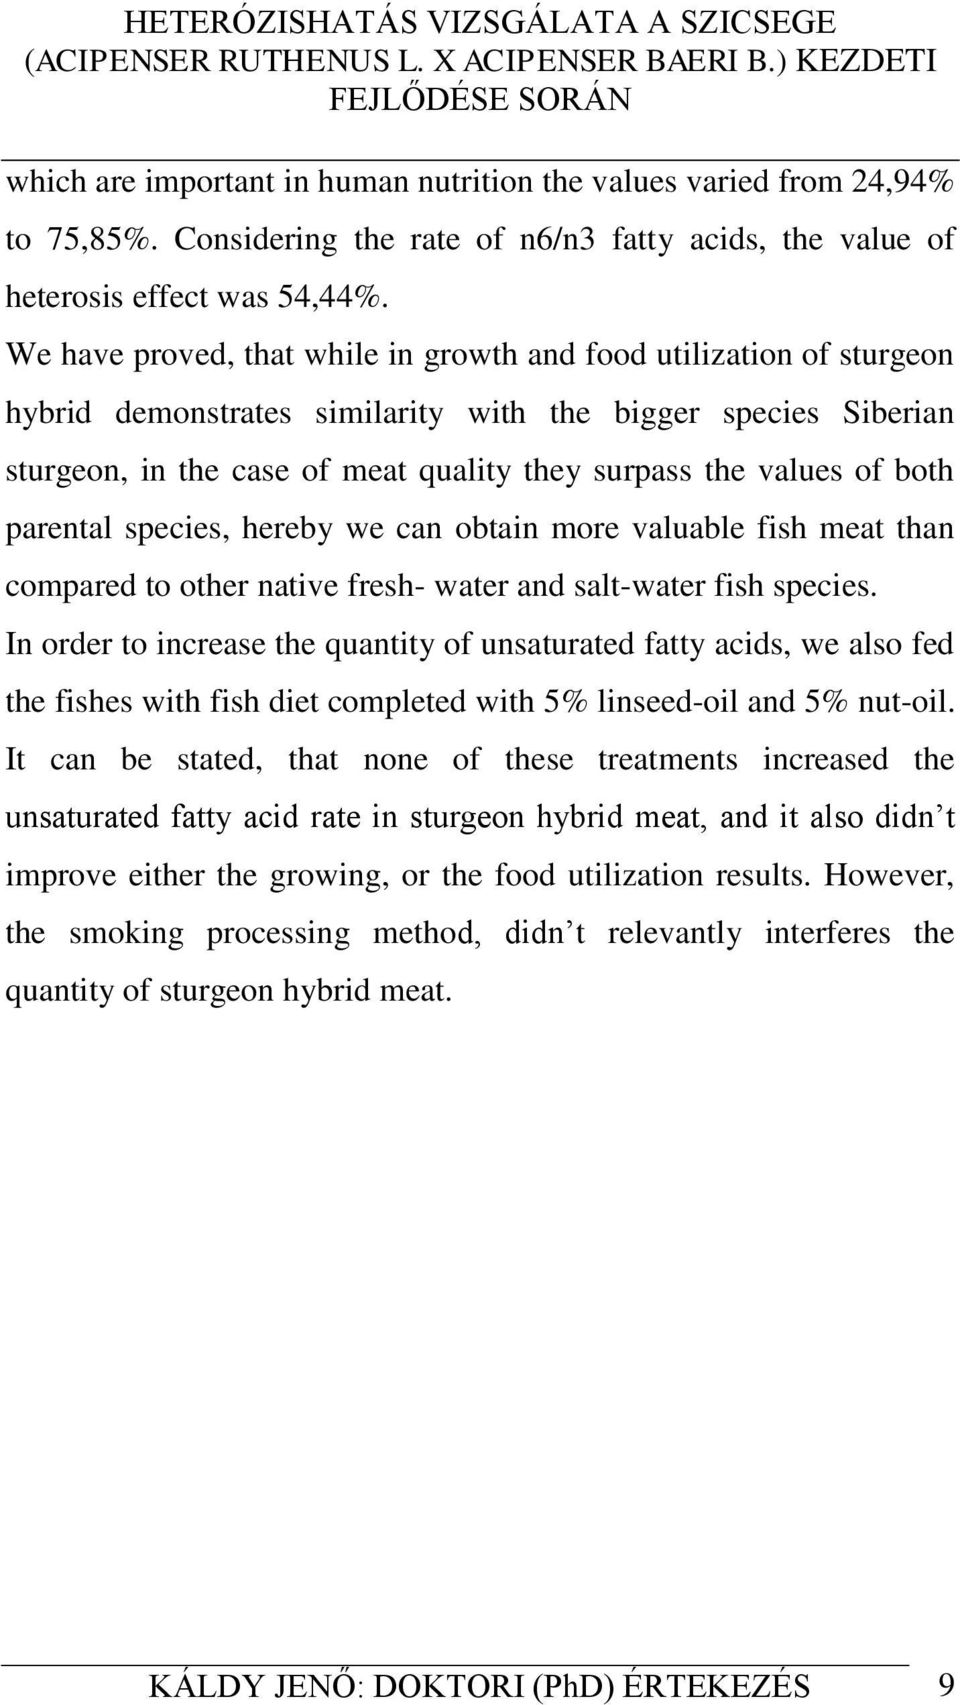 both parental species, hereby we can obtain more valuable fish meat than compared to other native fresh- water and salt-water fish species.